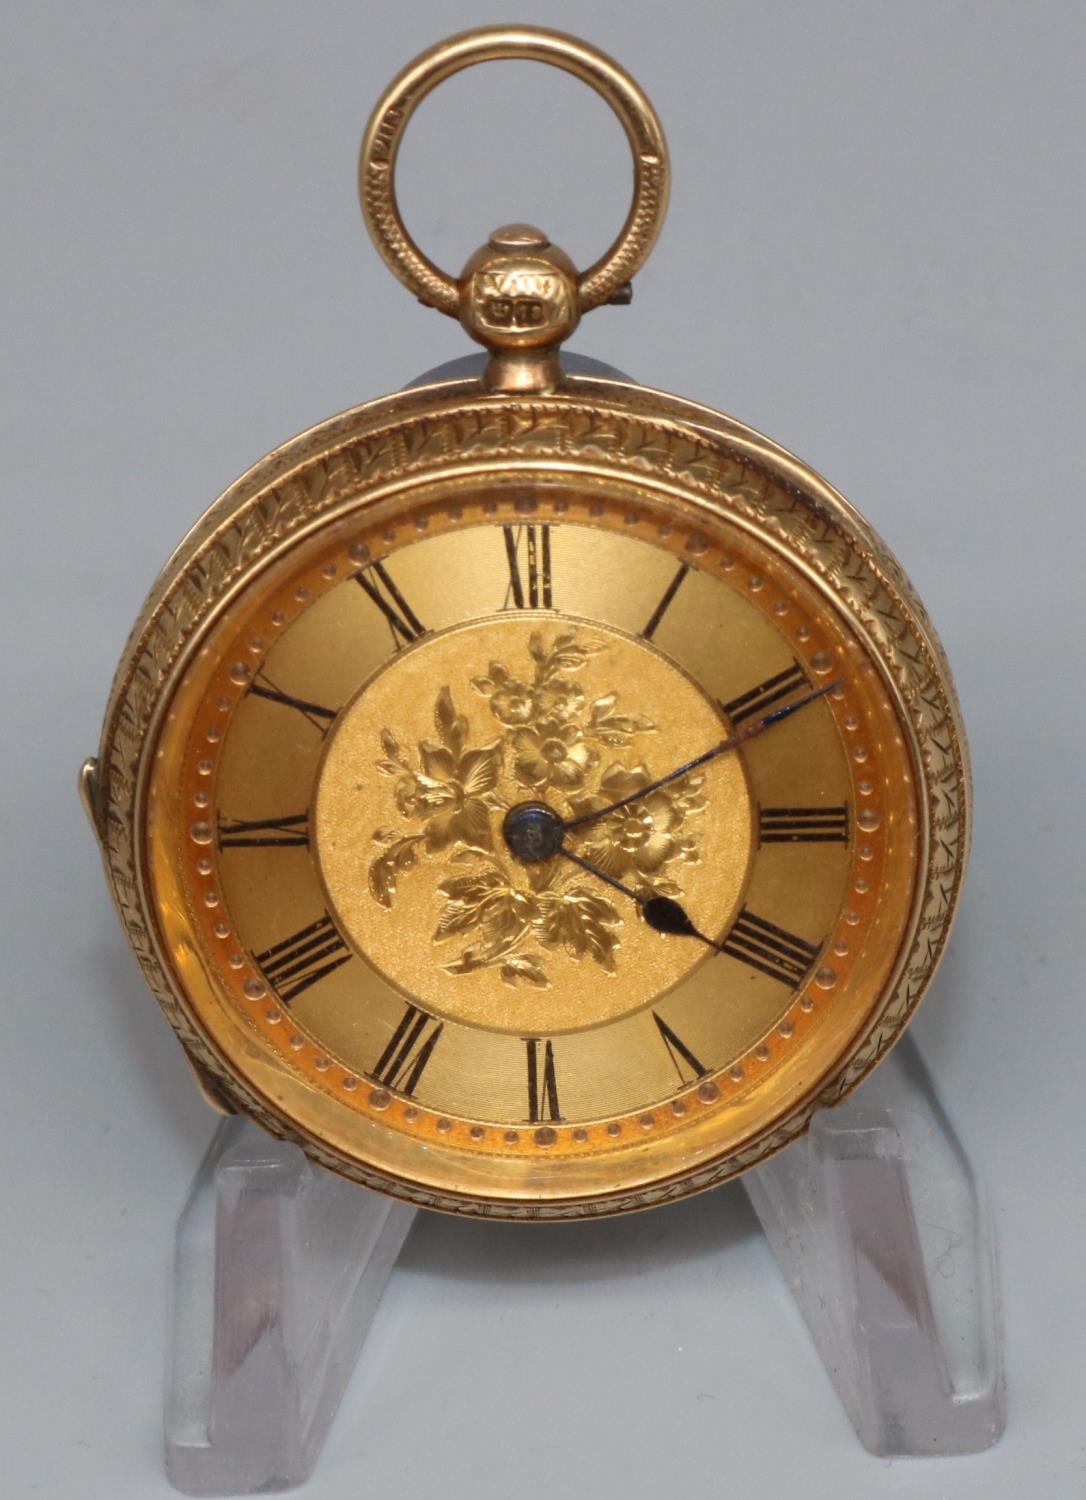 18ct gold hallmarked open faced key wound fob watch, floral and engine turned Roman dial, movement